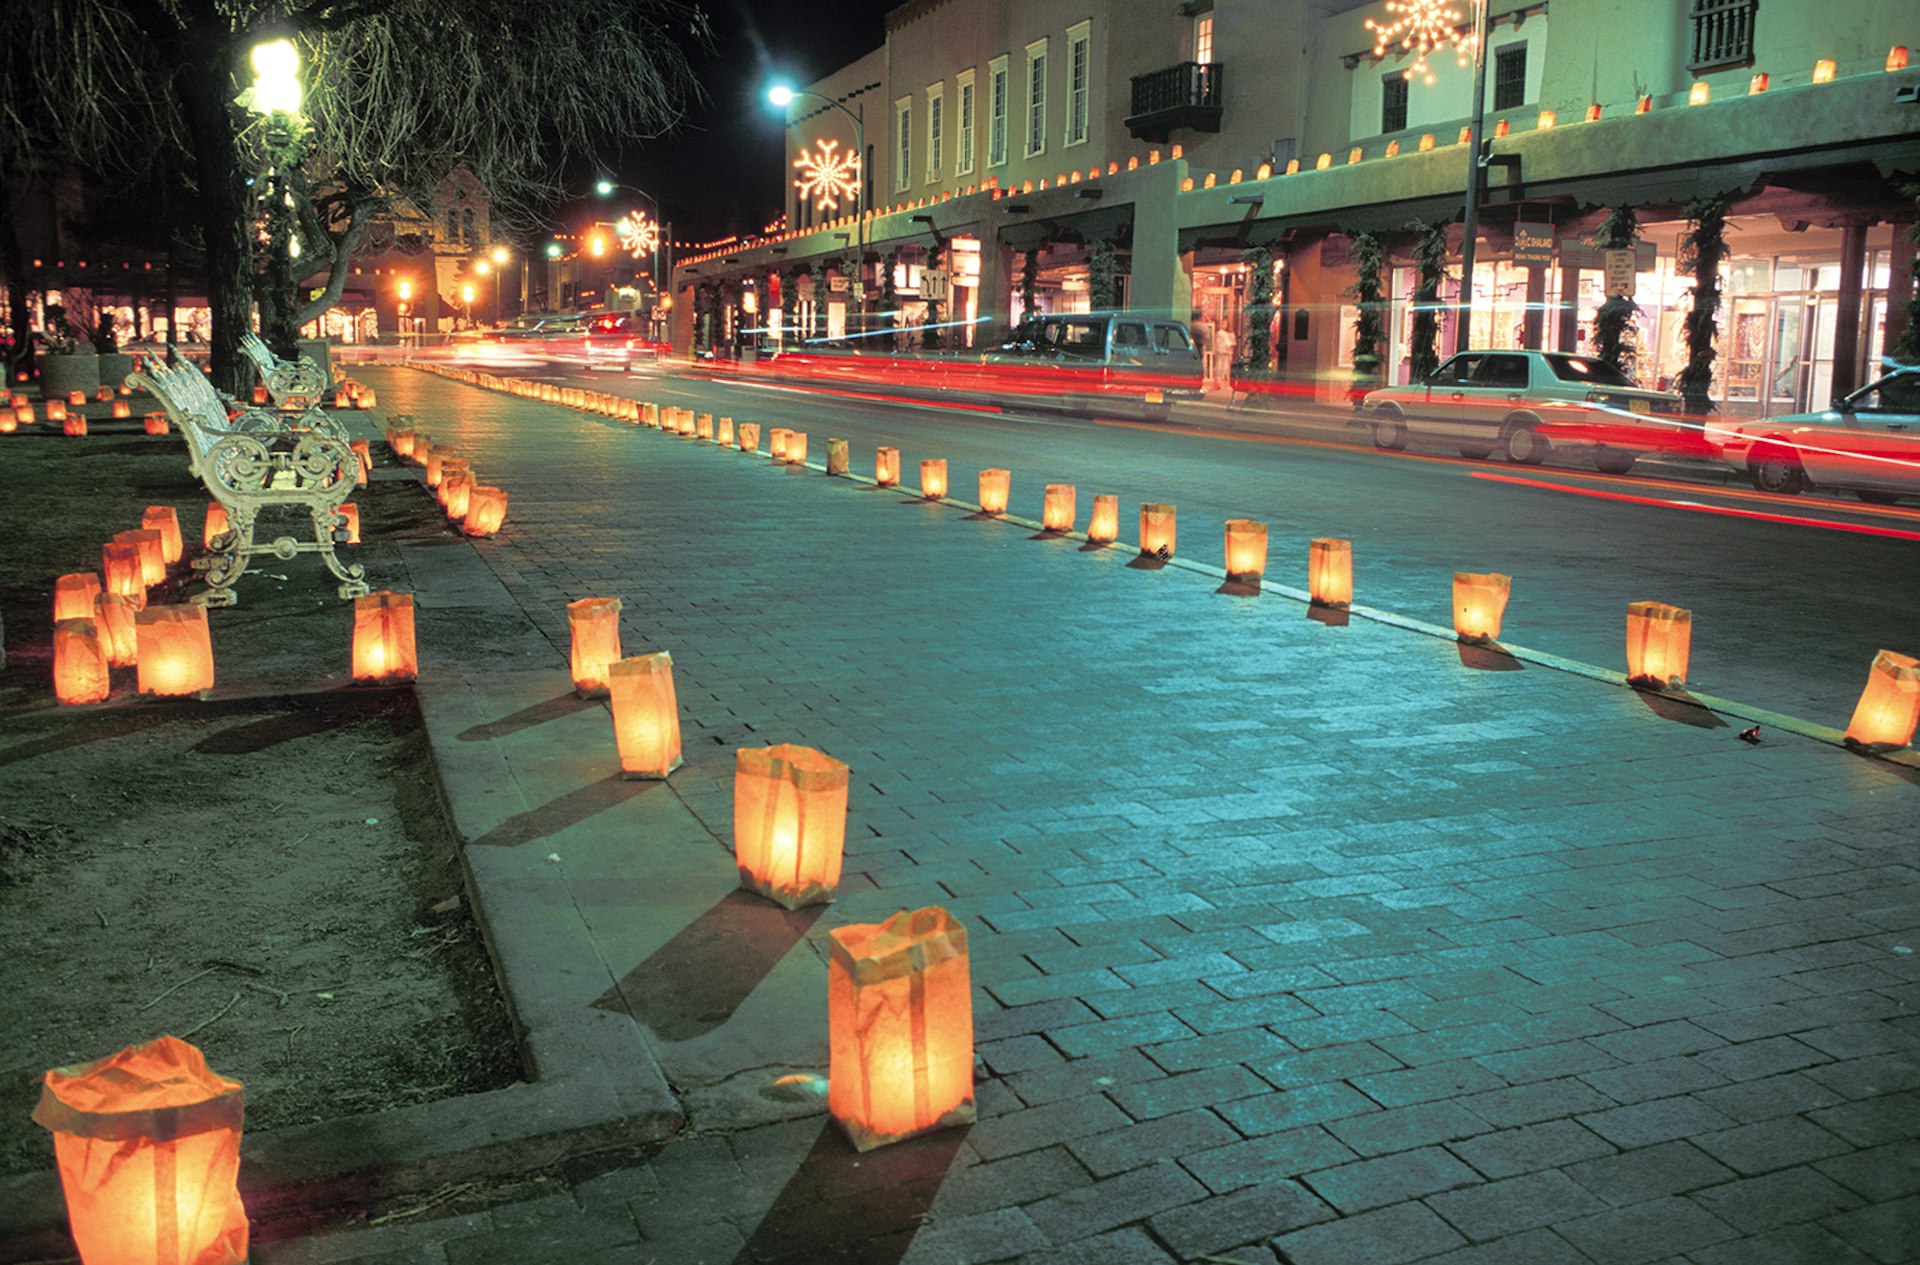 Little lanterns lining the streets of Santa Fe, New Mexico